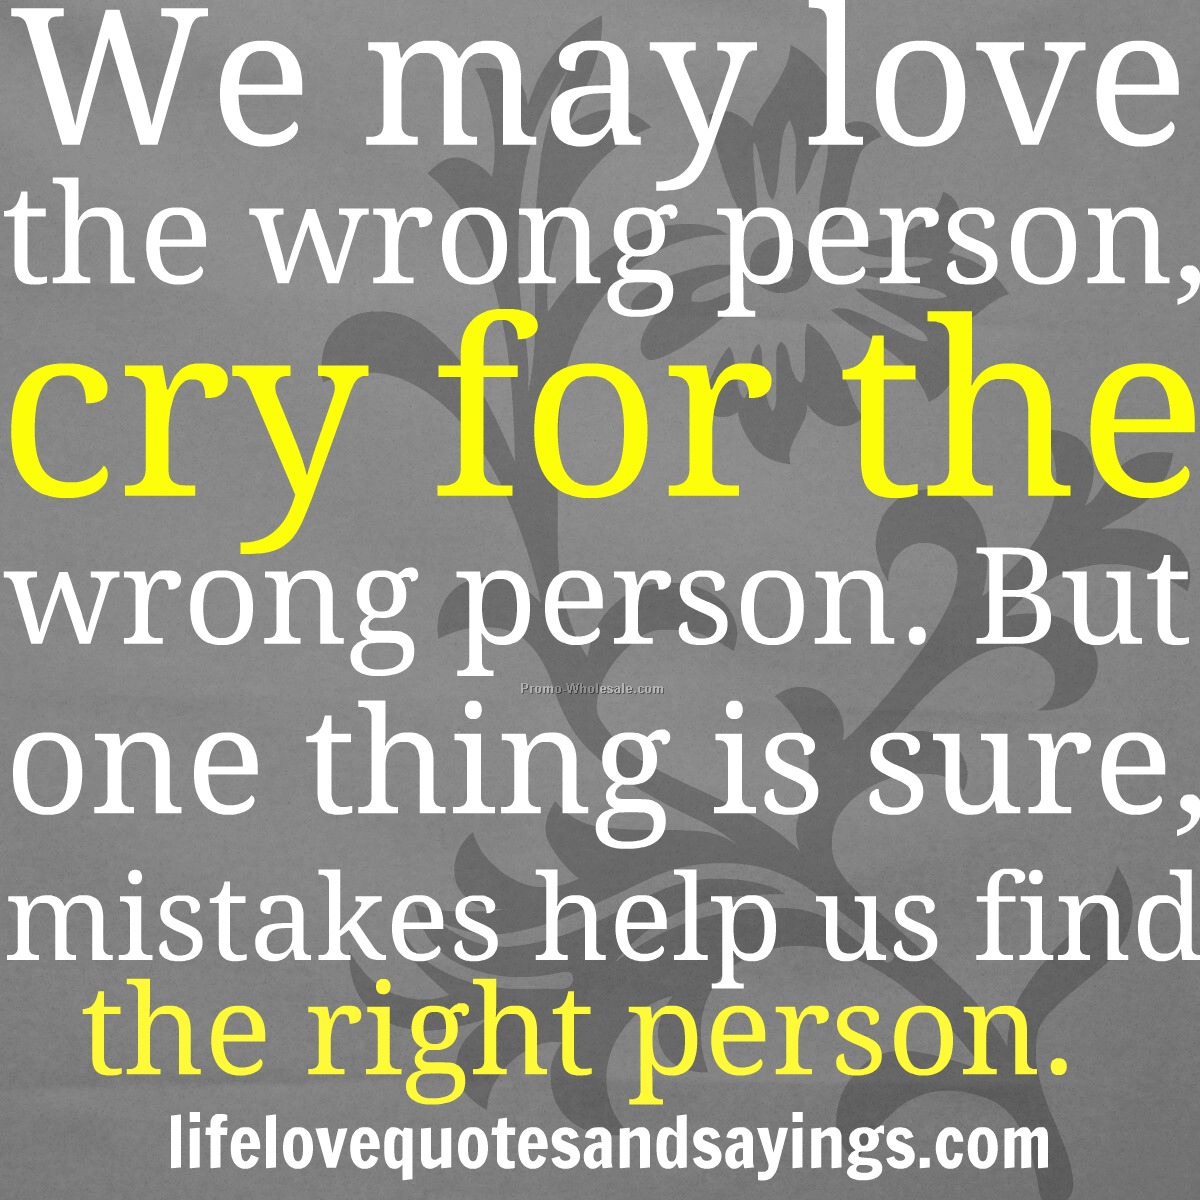 Messed up love quotes